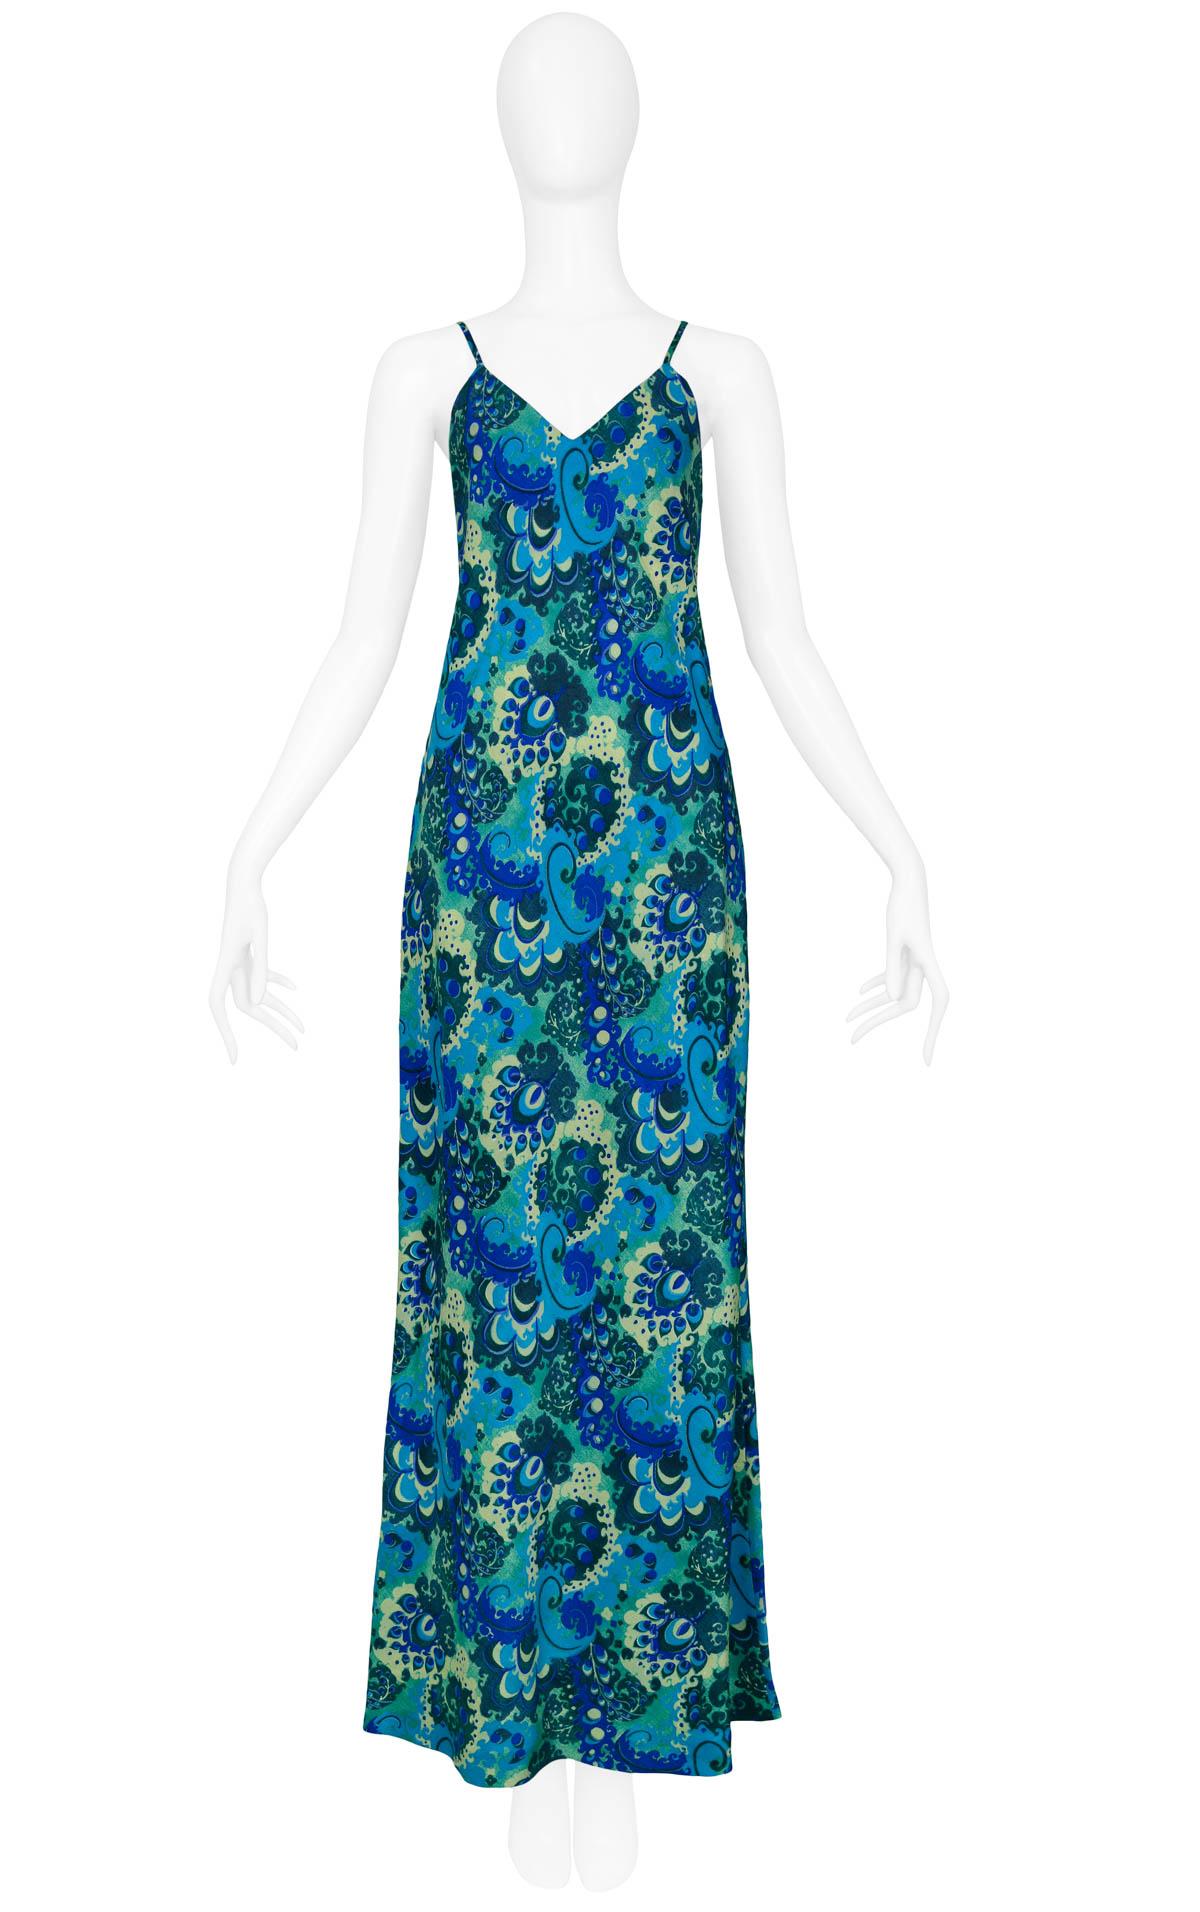 Vintage Dries Van Noten teal blue & green abstract floral printed slip dress. Collection 1997.

Excellent Condition.

Size: 38